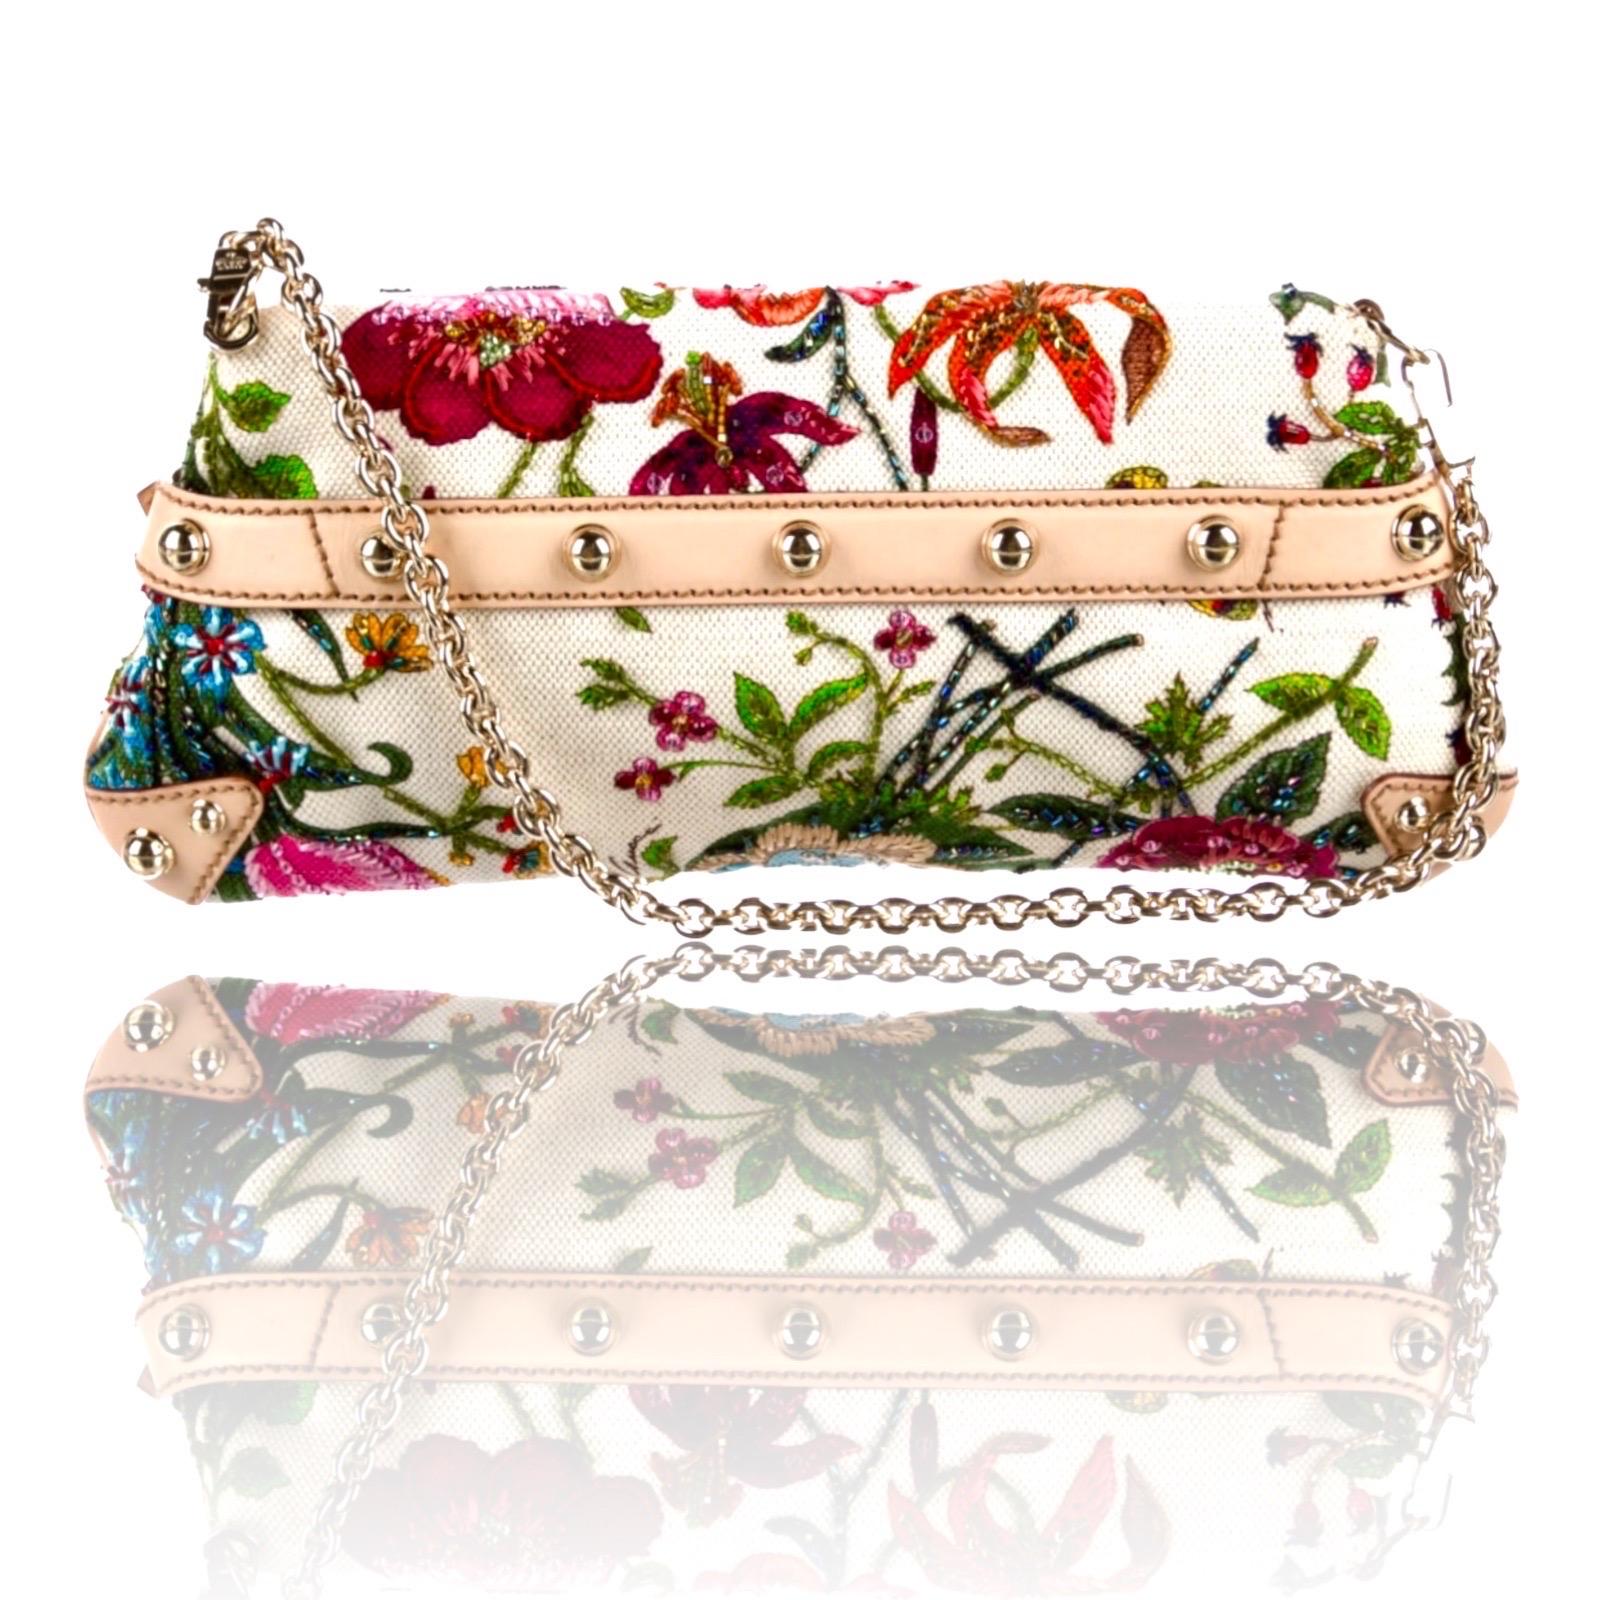 UNWORN Gucci Limited Edition Flora Print Beaded Embroidered Horsebit Bag Clutch For Sale 7